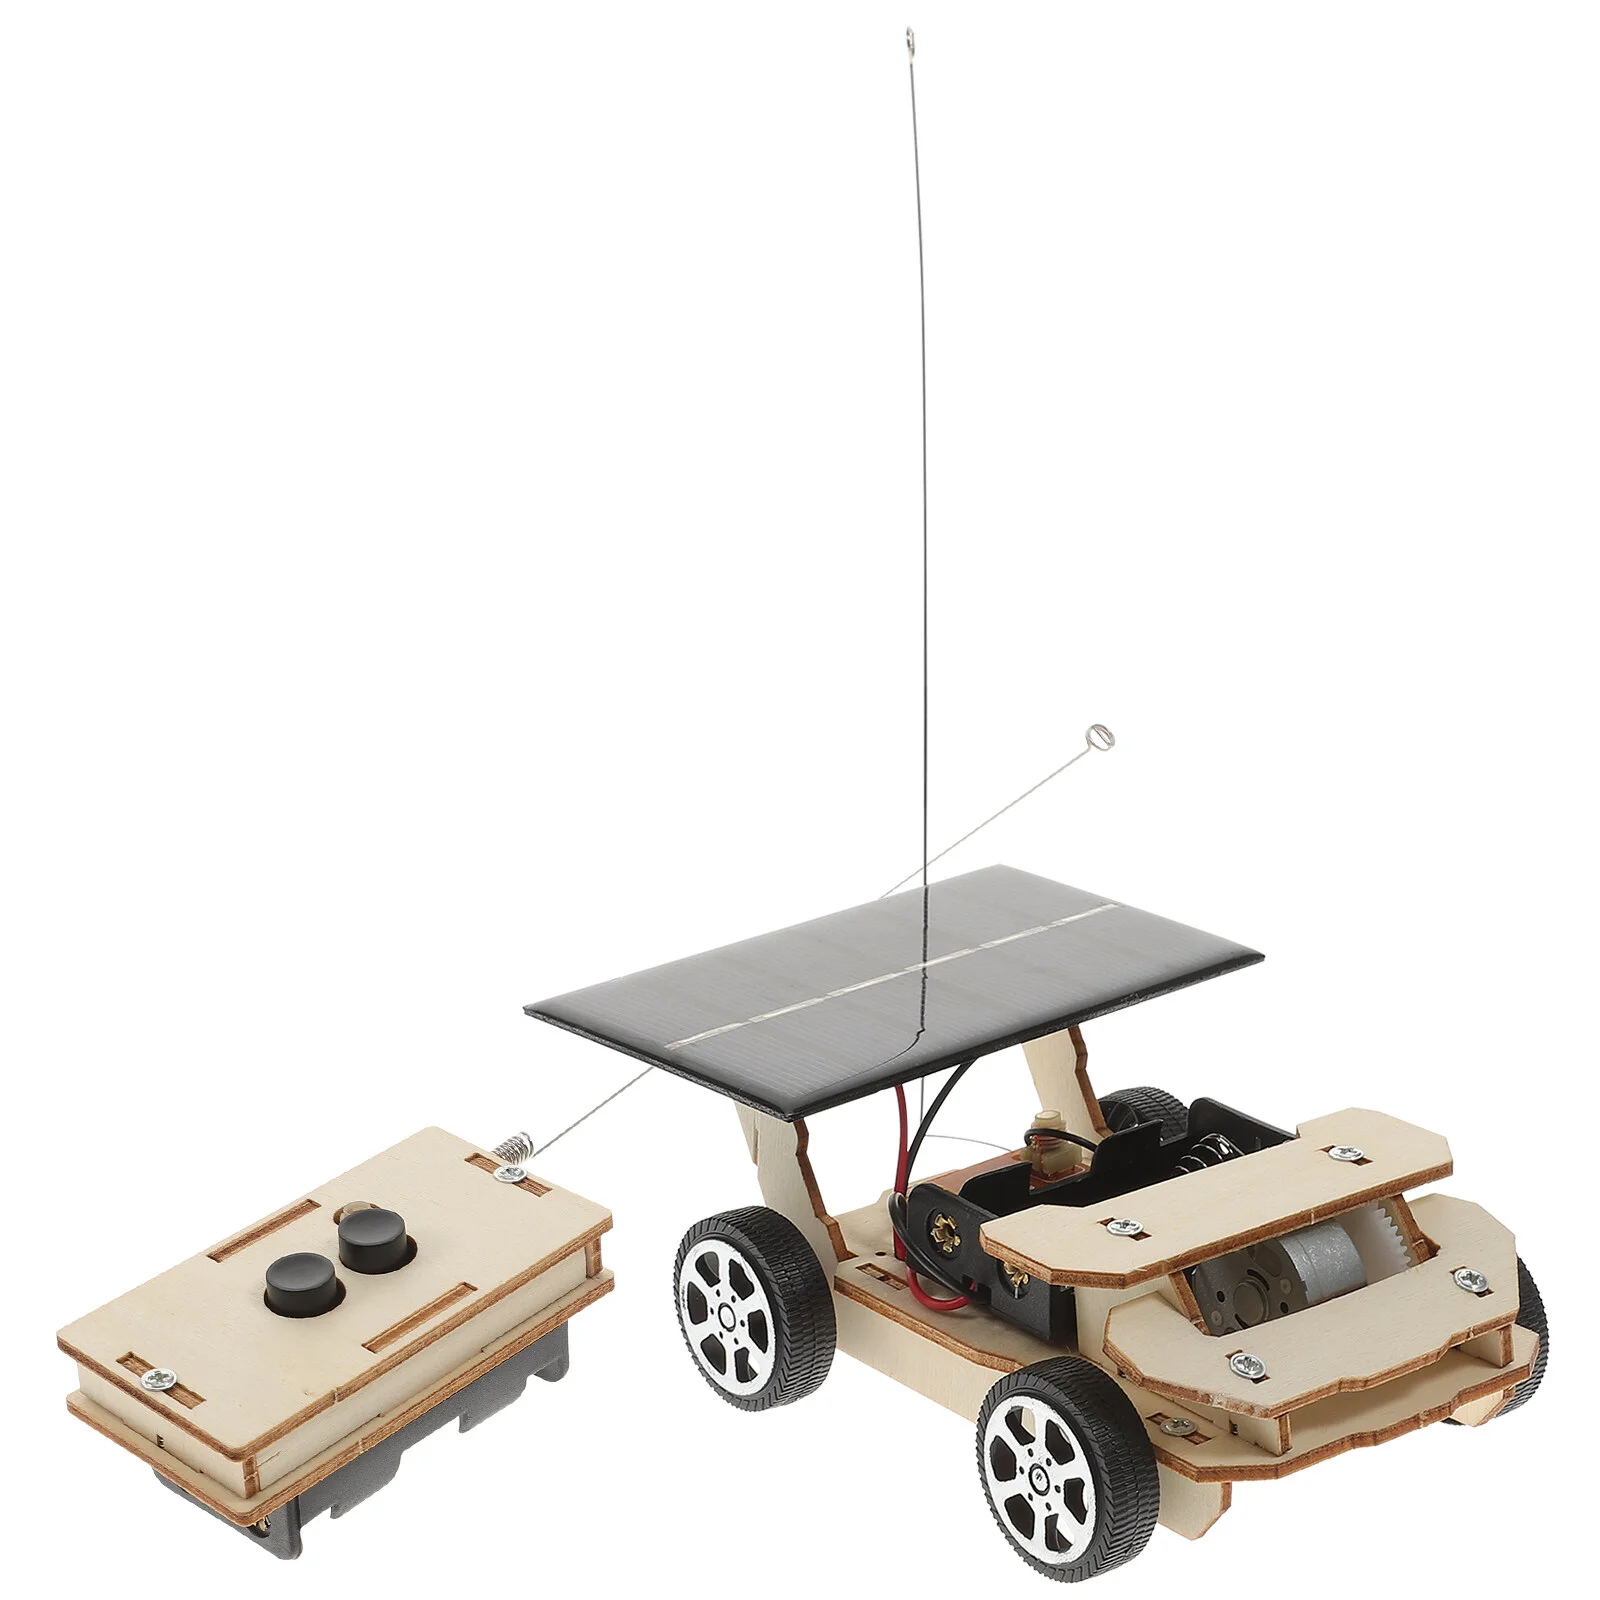 

Wooden Solar Car Model Kits to Build, Car, Educational Science Kits for Kids Age 8- 12, 3D Puzzles Toys for Boys